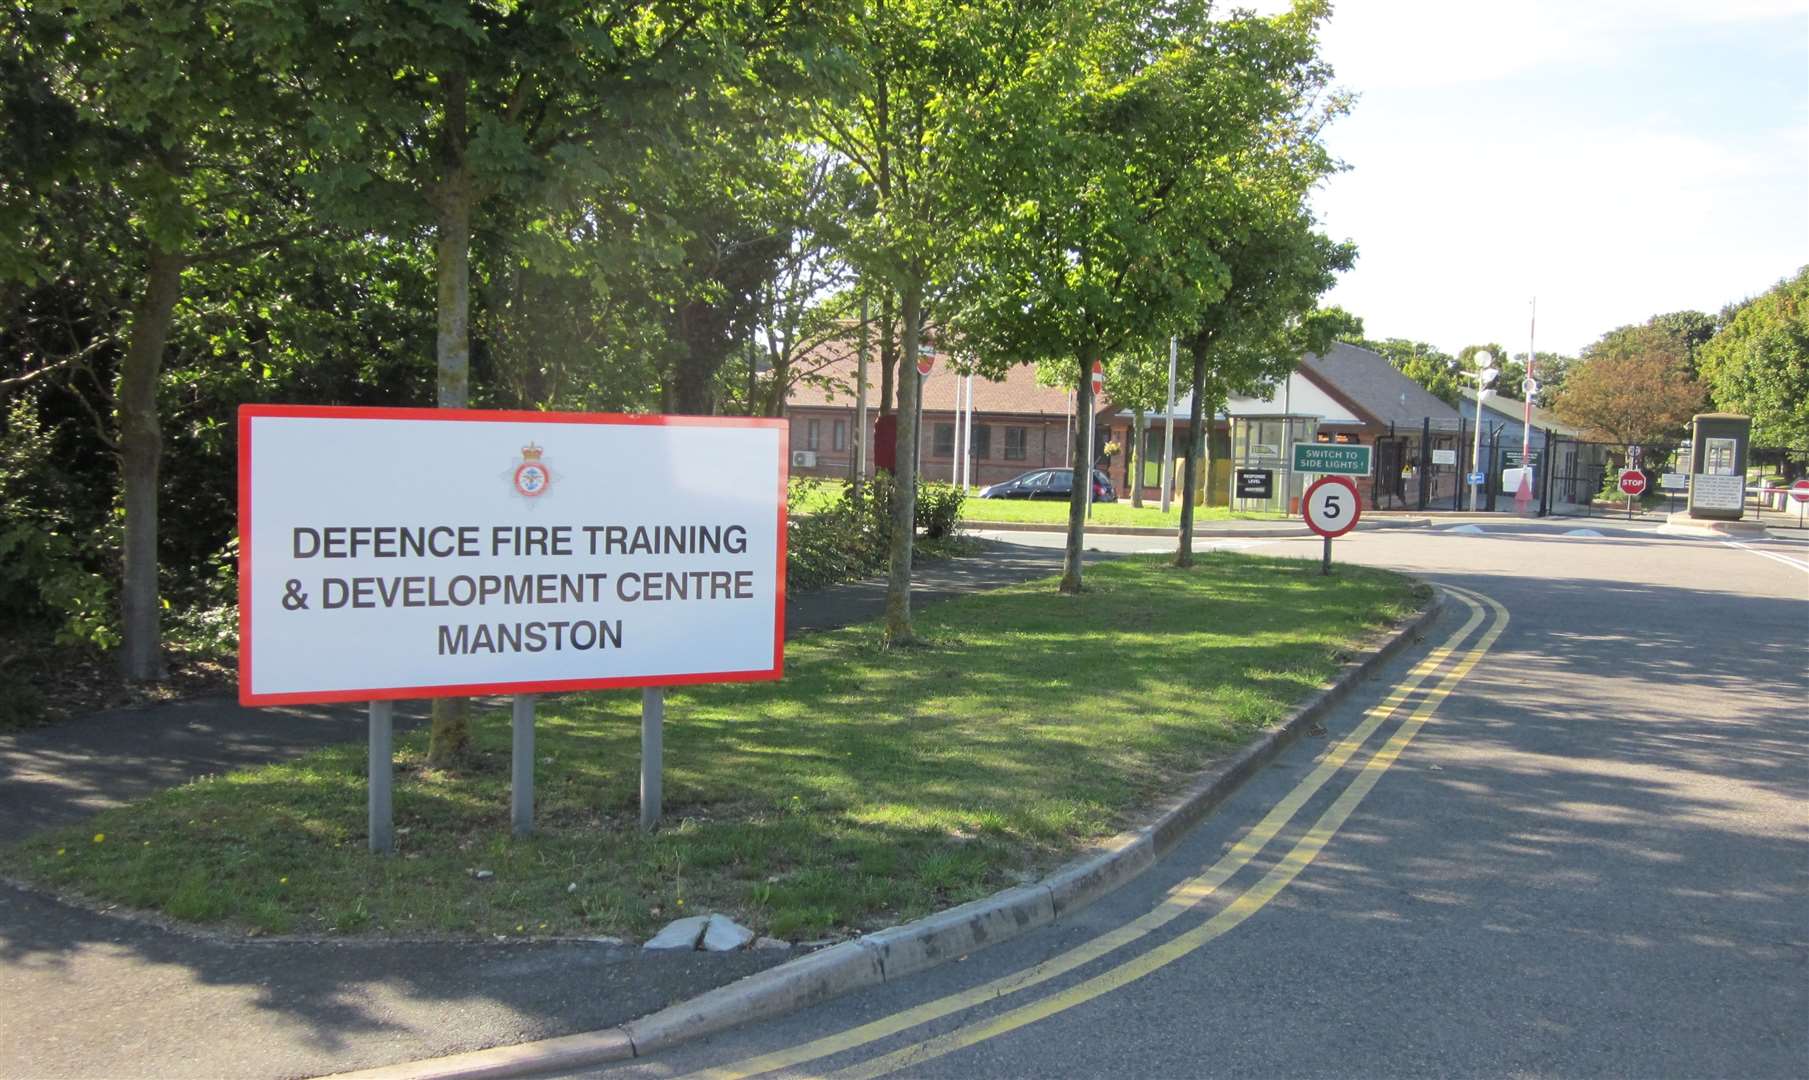 The Defence Fire Training and Development Centre in Manston